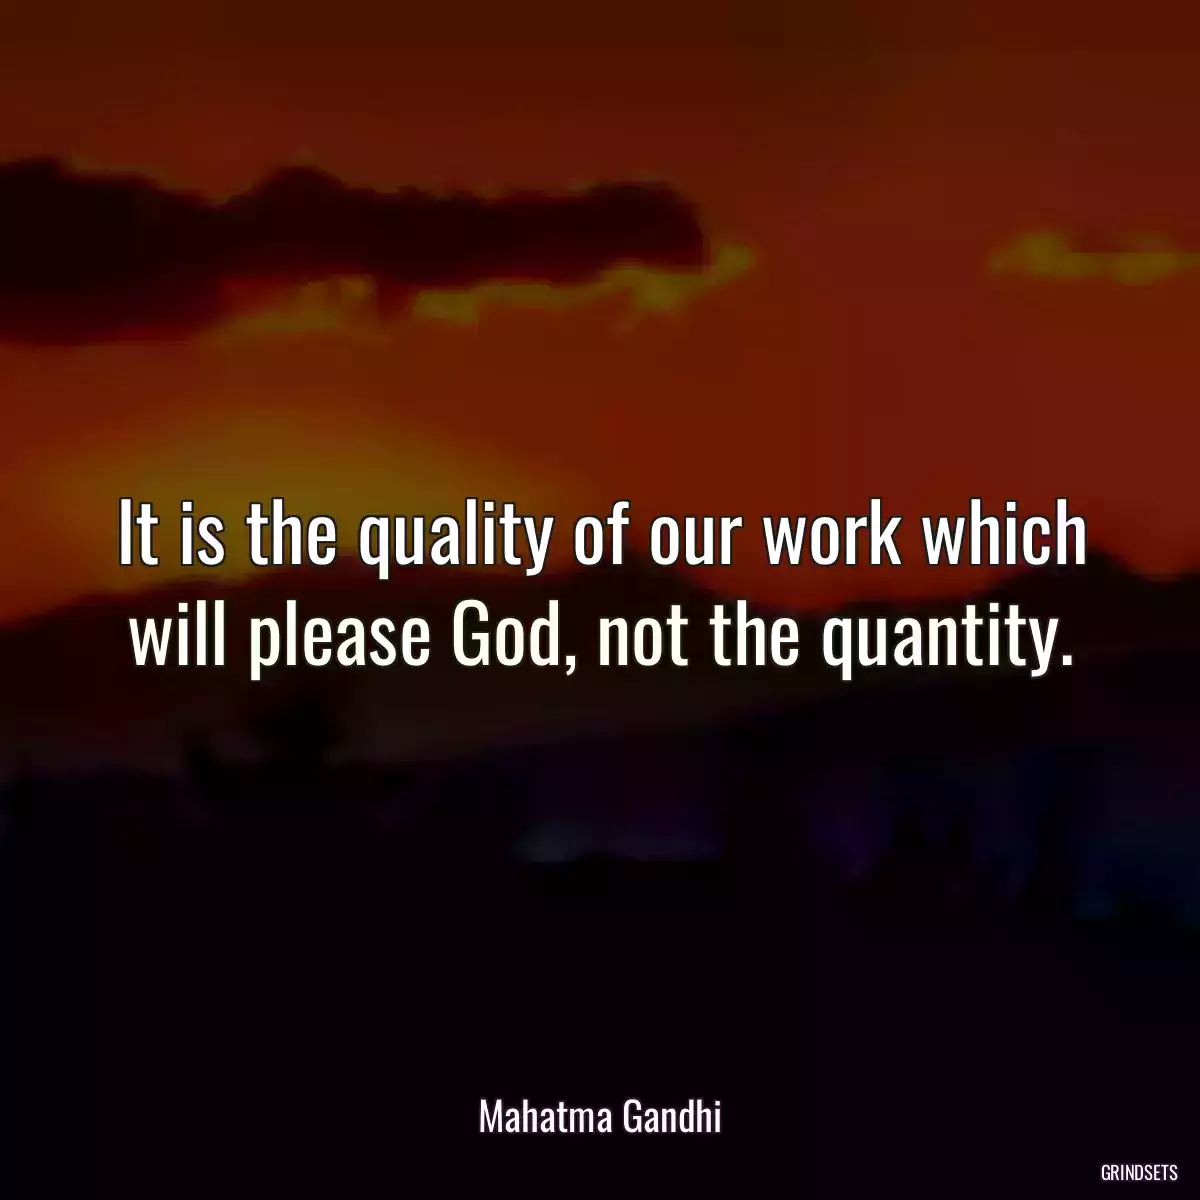 It is the quality of our work which will please God, not the quantity.